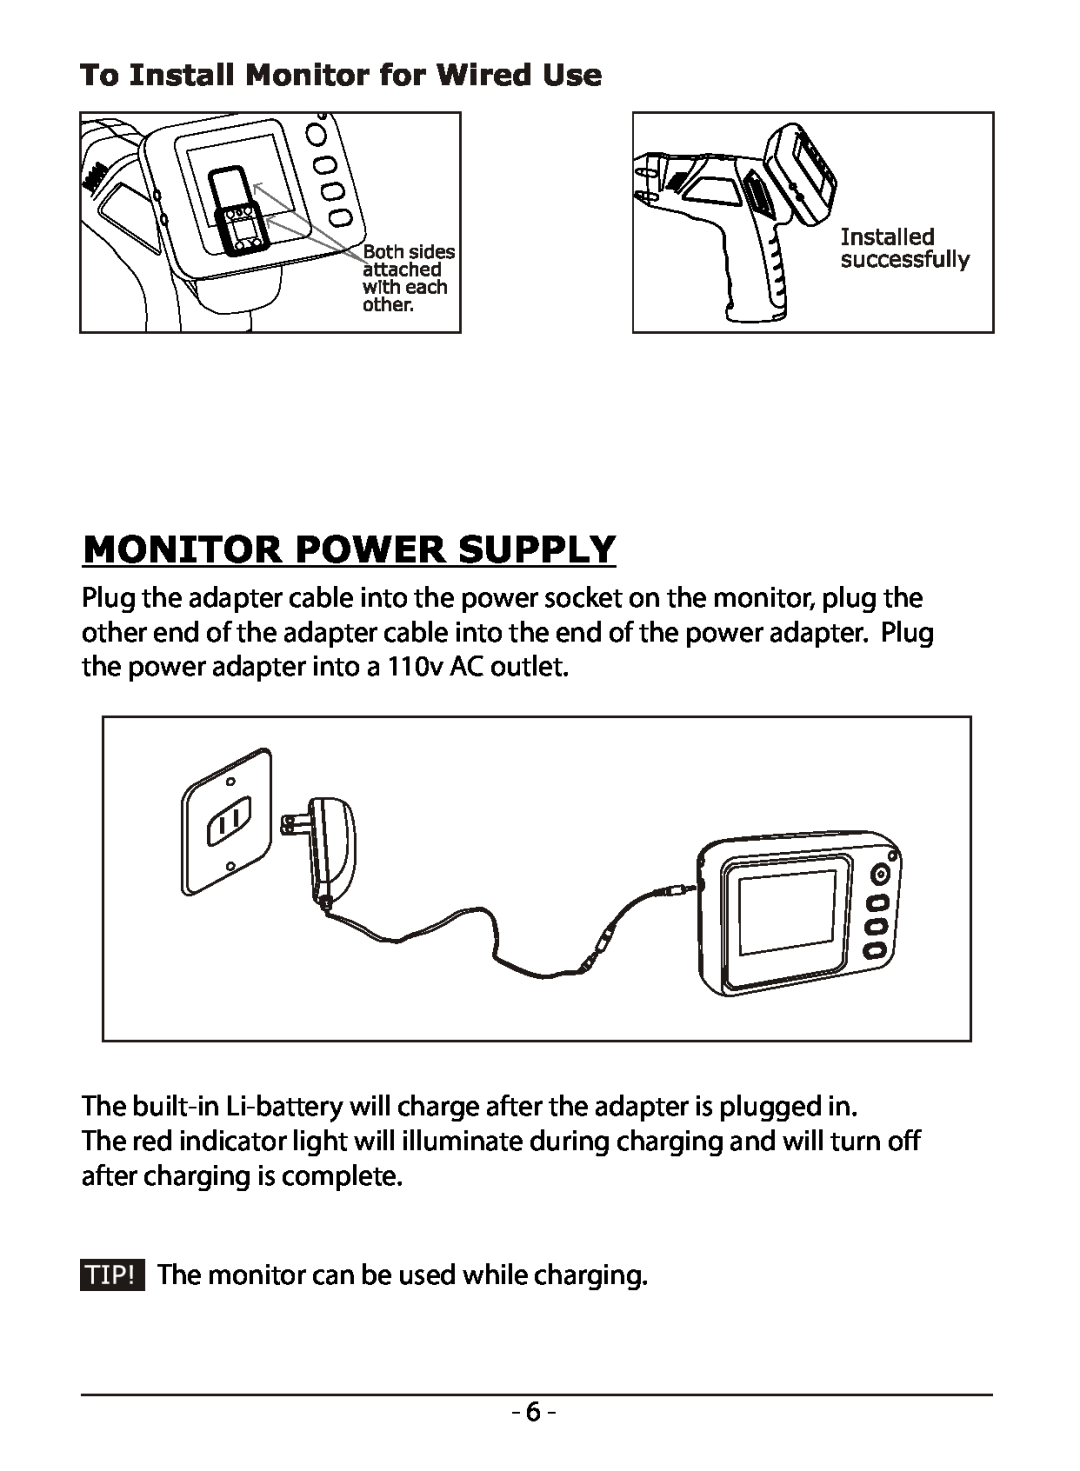 Whistler WIC-2409C user manual The monitor can be used while charging 